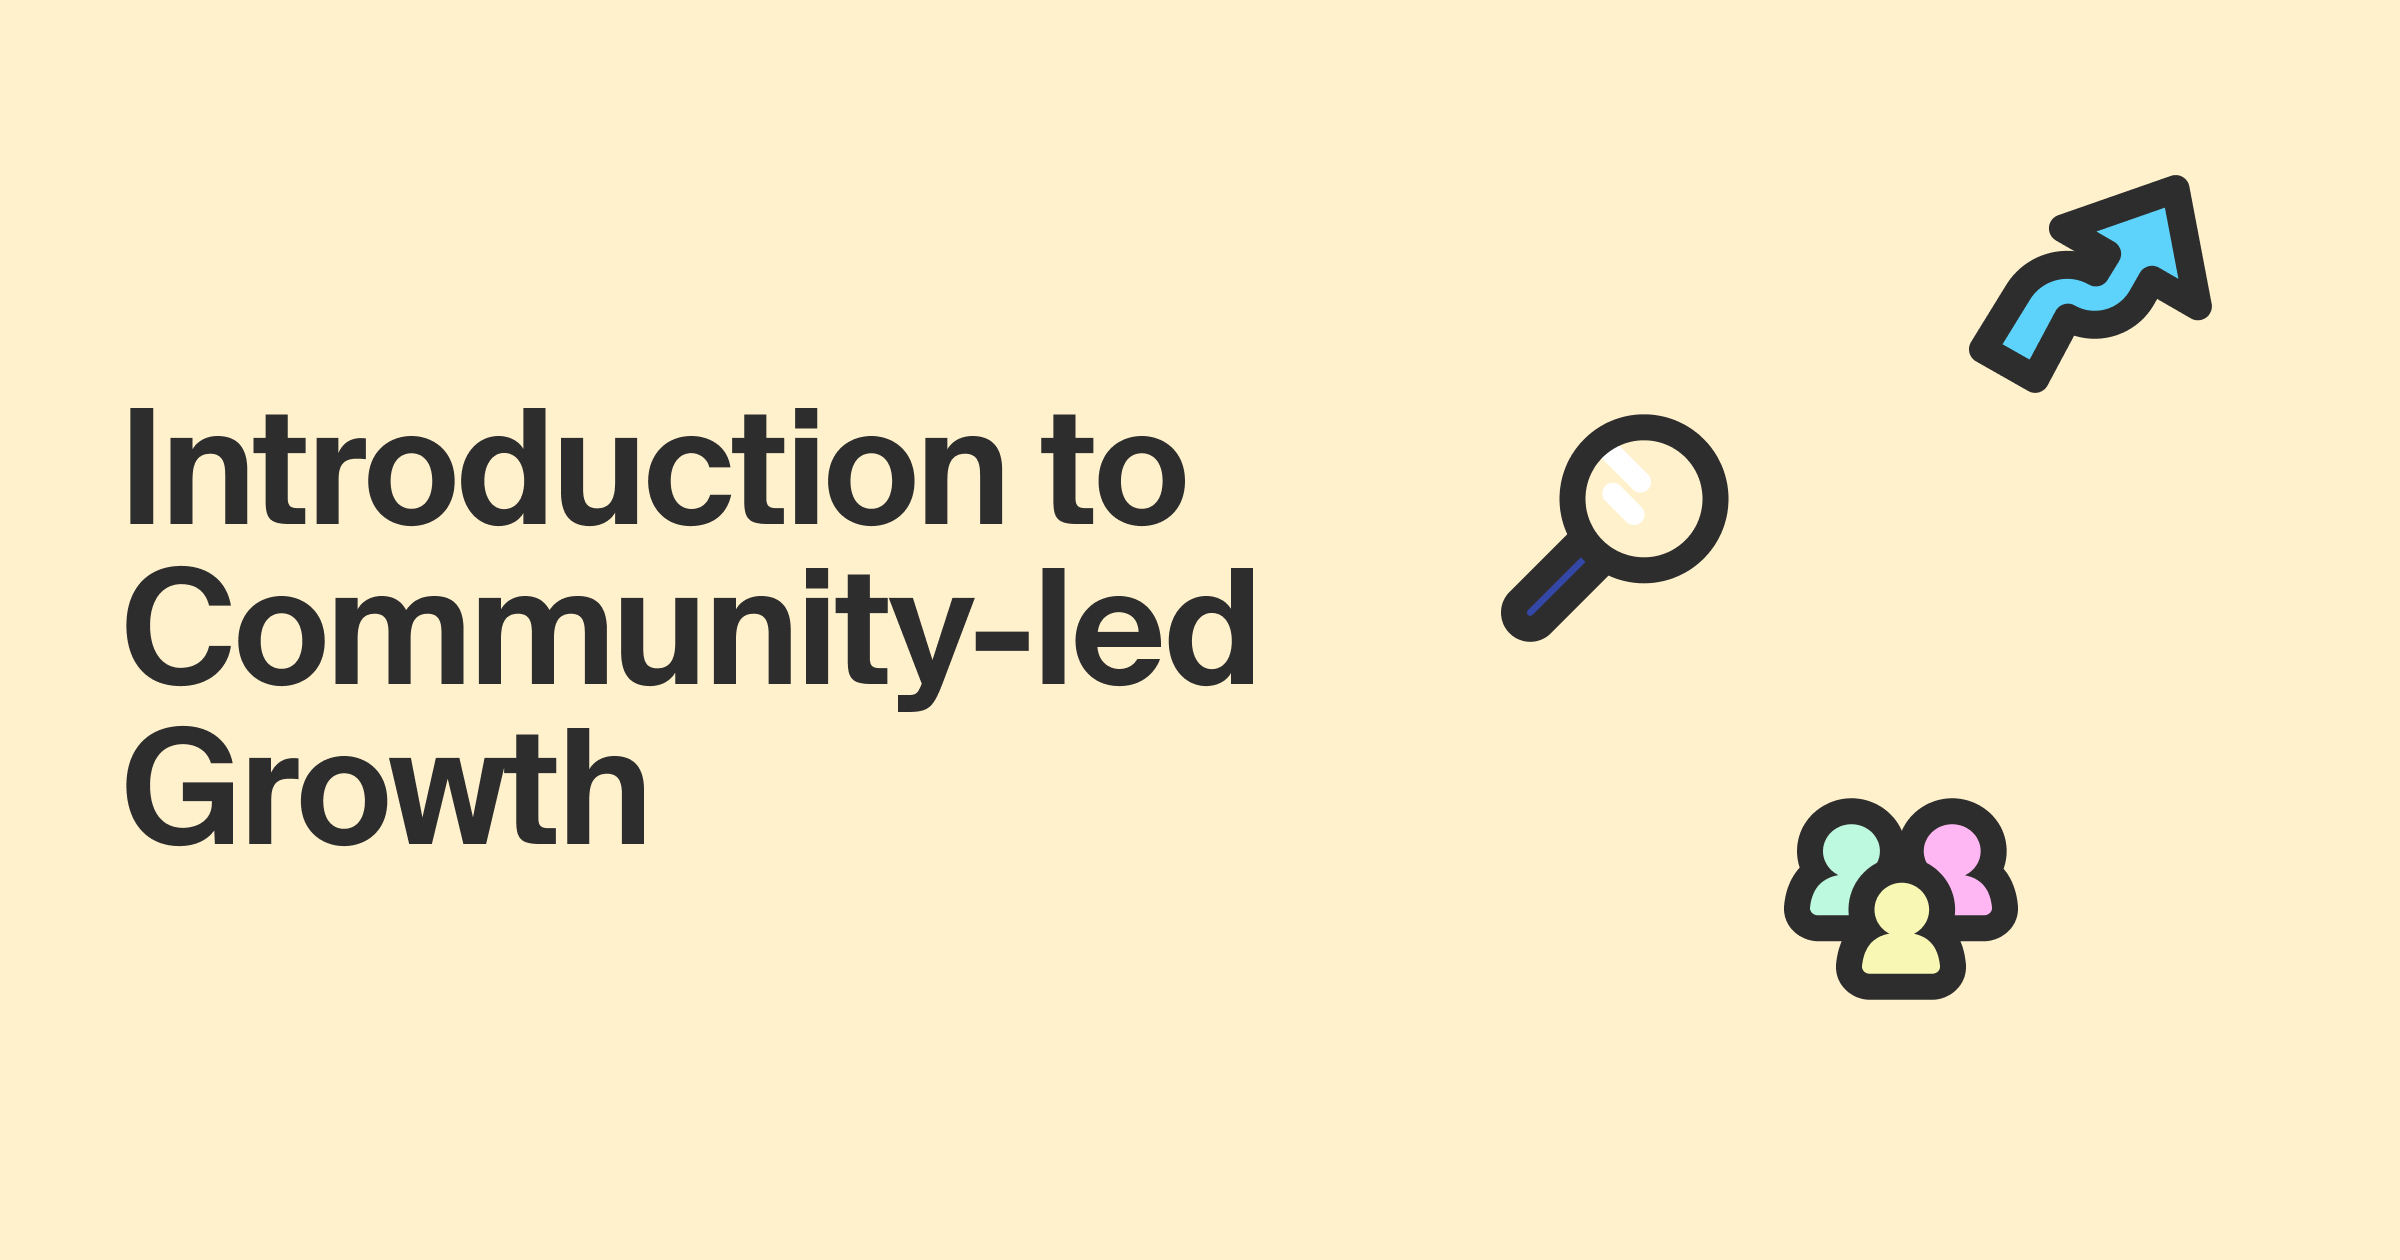 Introduction to Community-led Growth